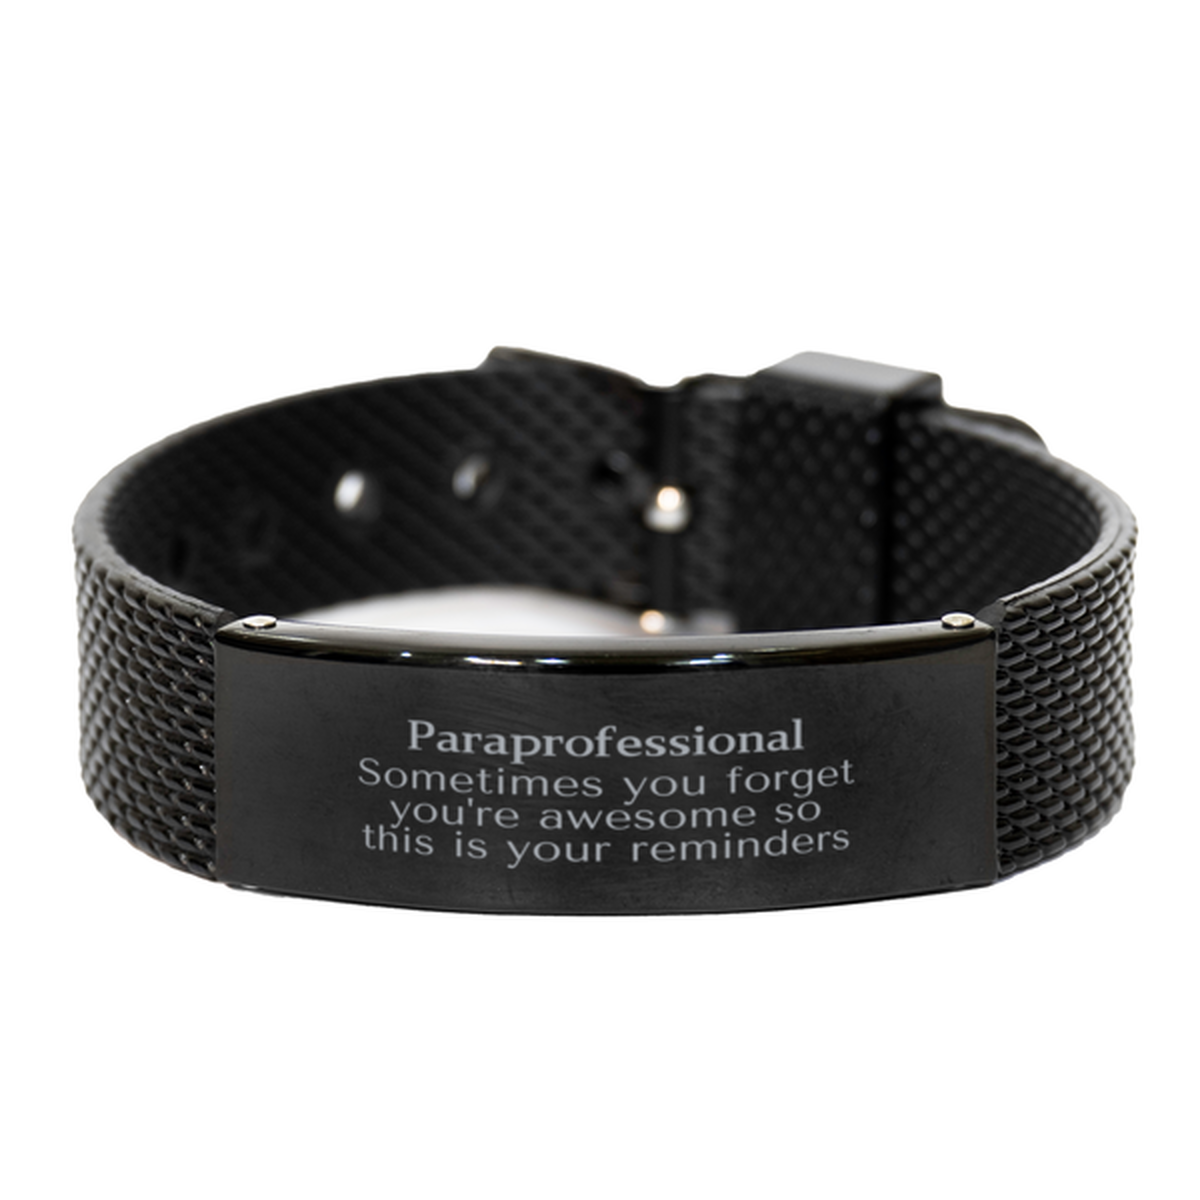 Sentimental Paraprofessional Black Shark Mesh Bracelet, Paraprofessional Sometimes you forget you're awesome so this is your reminders, Graduation Christmas Birthday Gifts for Paraprofessional, Men, Women, Coworkers